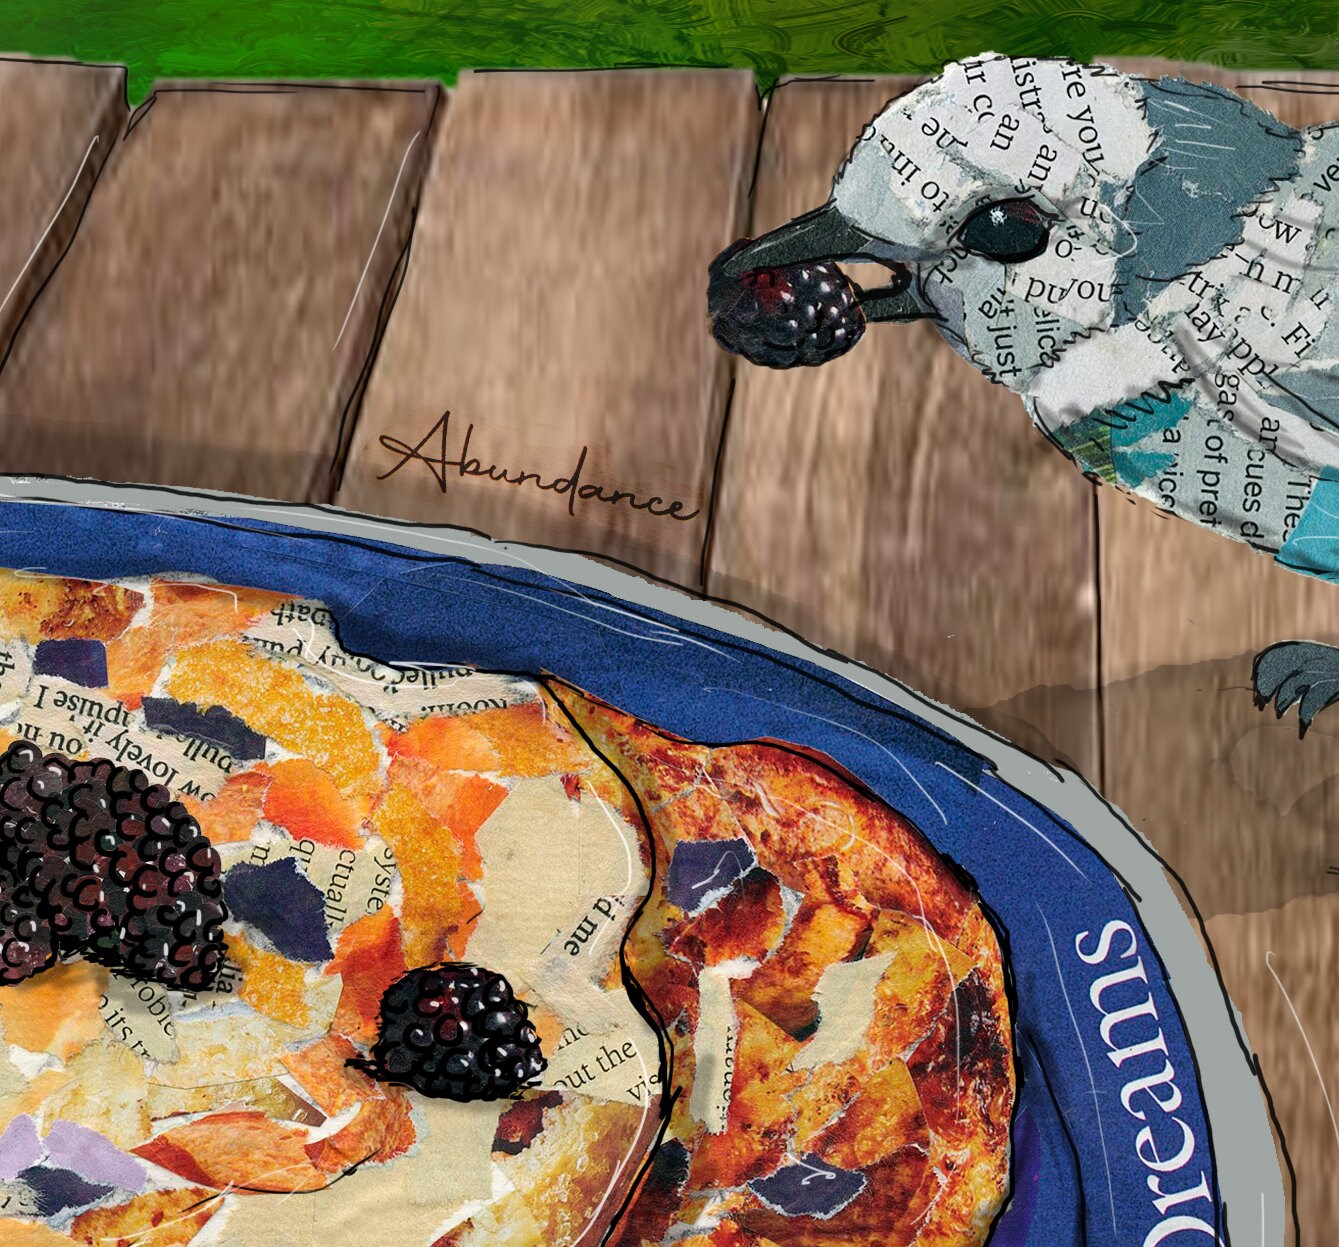 Greeting Card of a mixed media collage of a grey jay stealing a blackberry from a camper's pancakes - blank inside